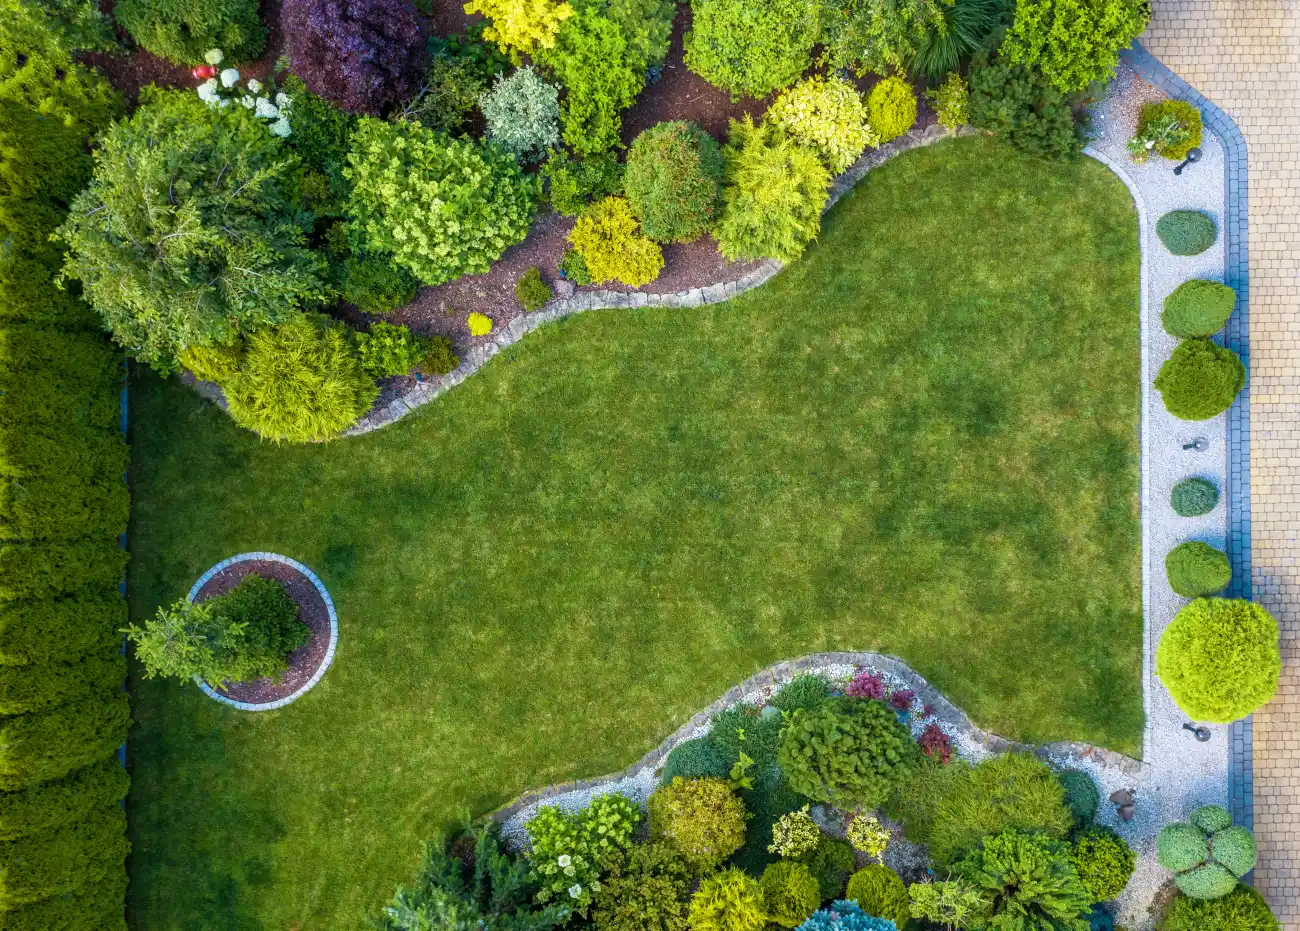 Master the Art of Outdoor Design With a Free Landscape Architecture Course Online